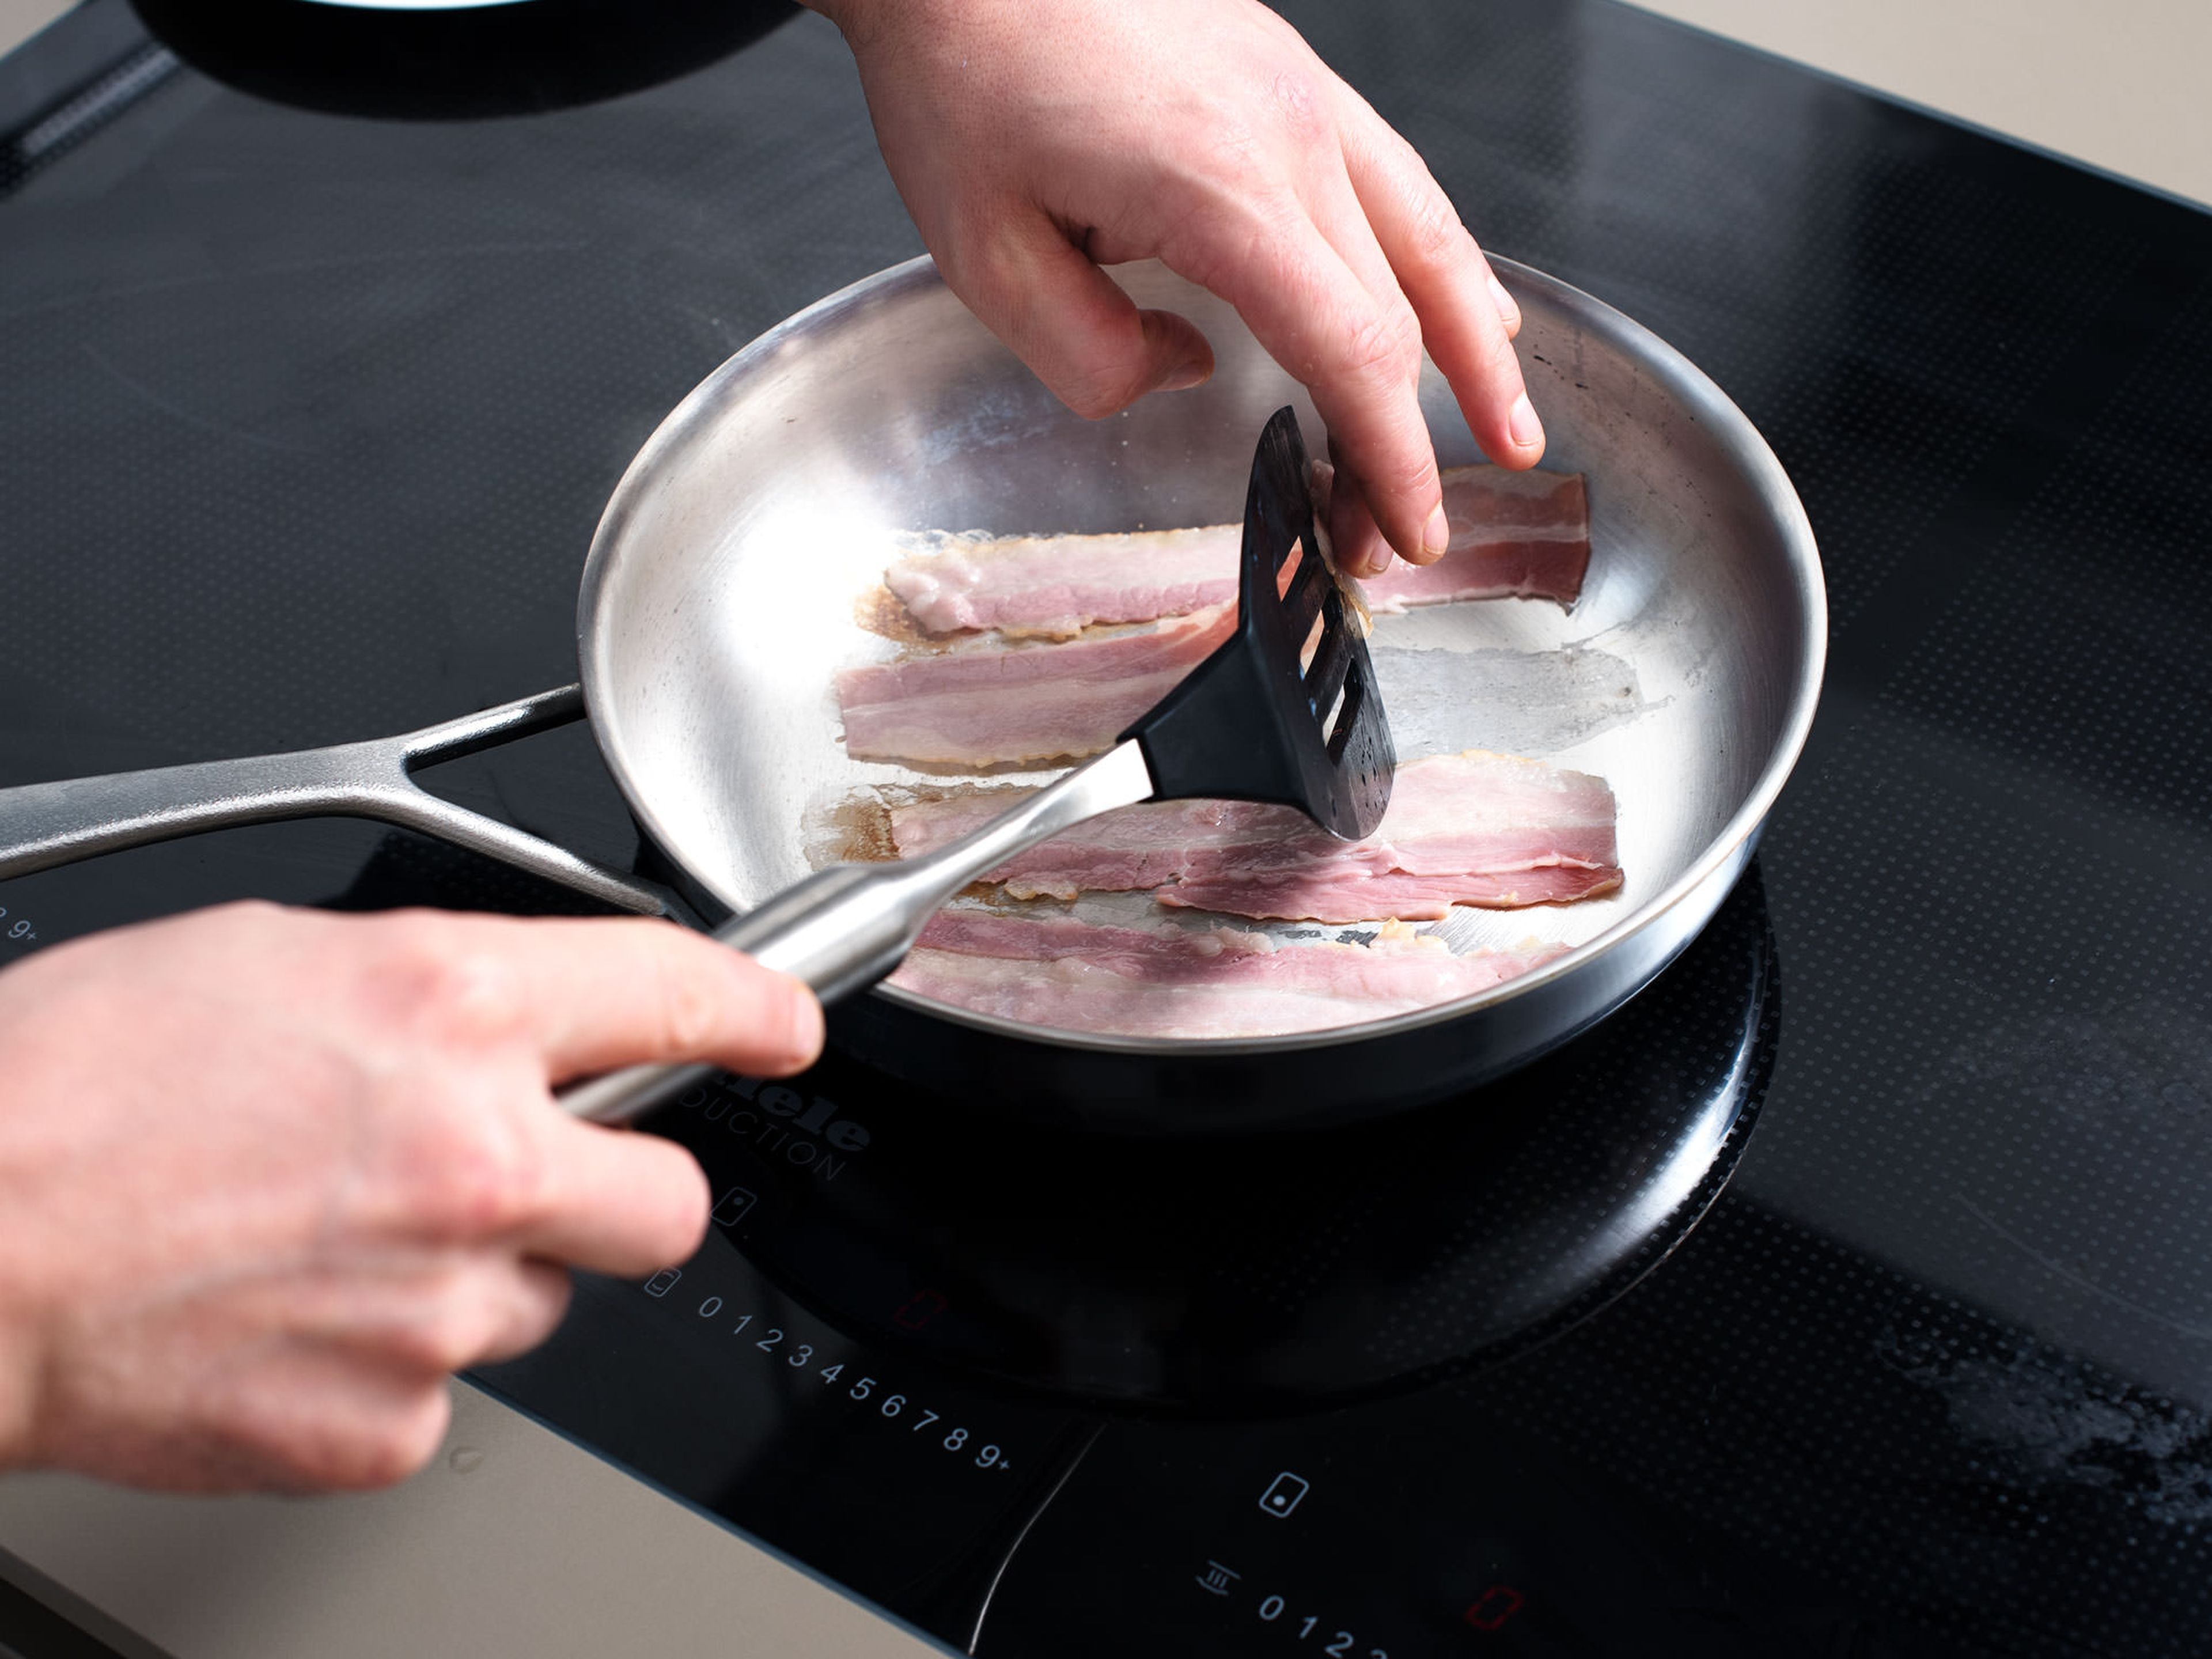 In a large frying pan, sauté bacon over medium-high heat until crispy. Remove from pan and allow to cool.